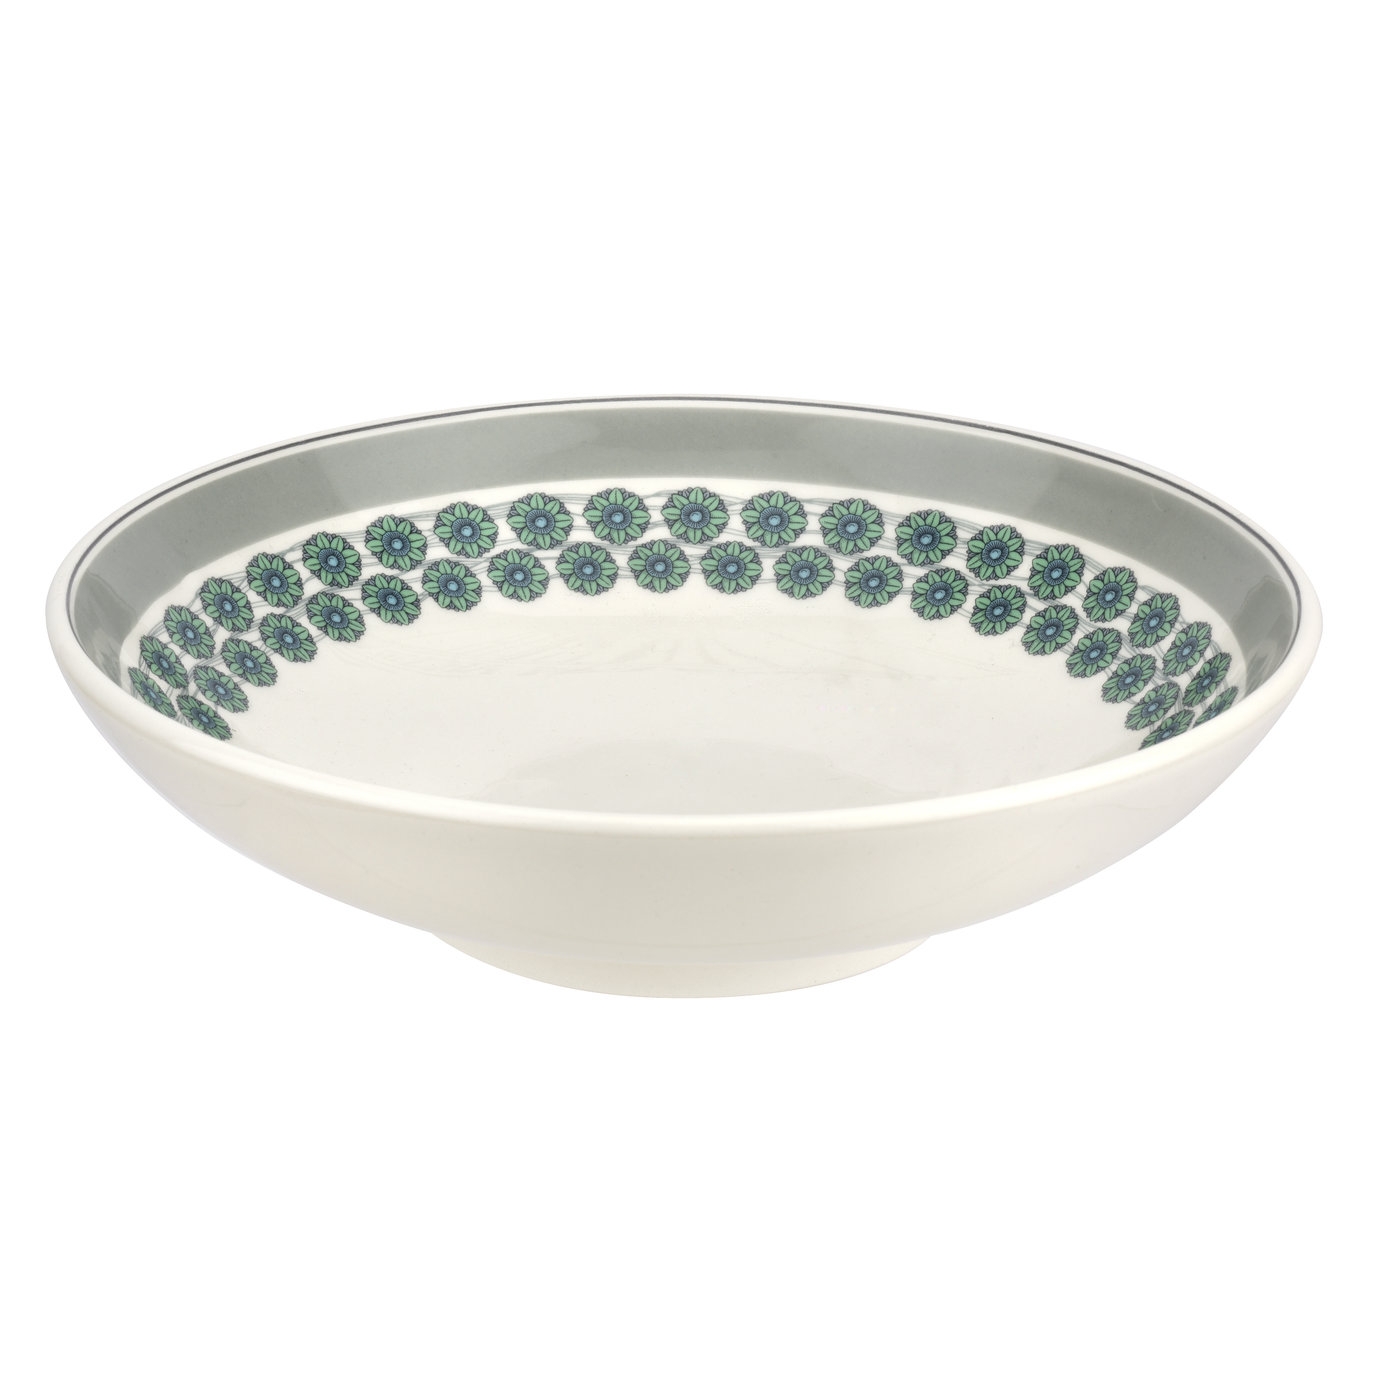 Westerly Grey 10 Inch Low Bowl image number null